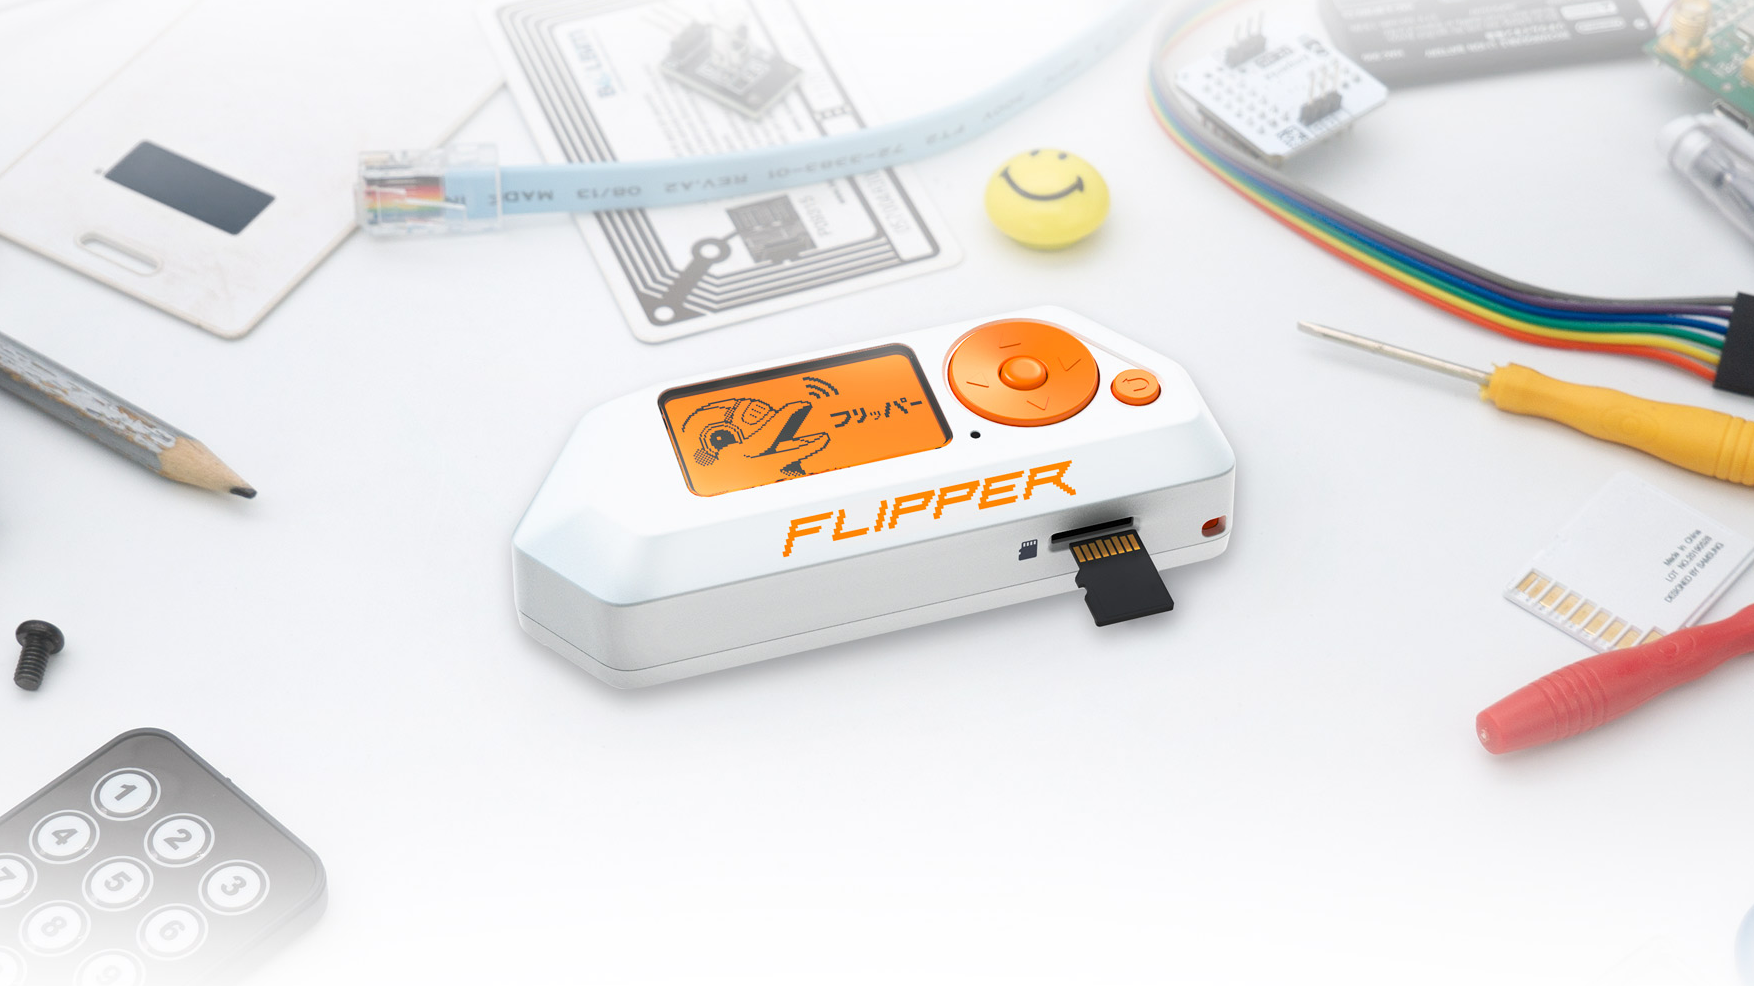 Flipper Zero: what this Tamagotchi-like tool can do